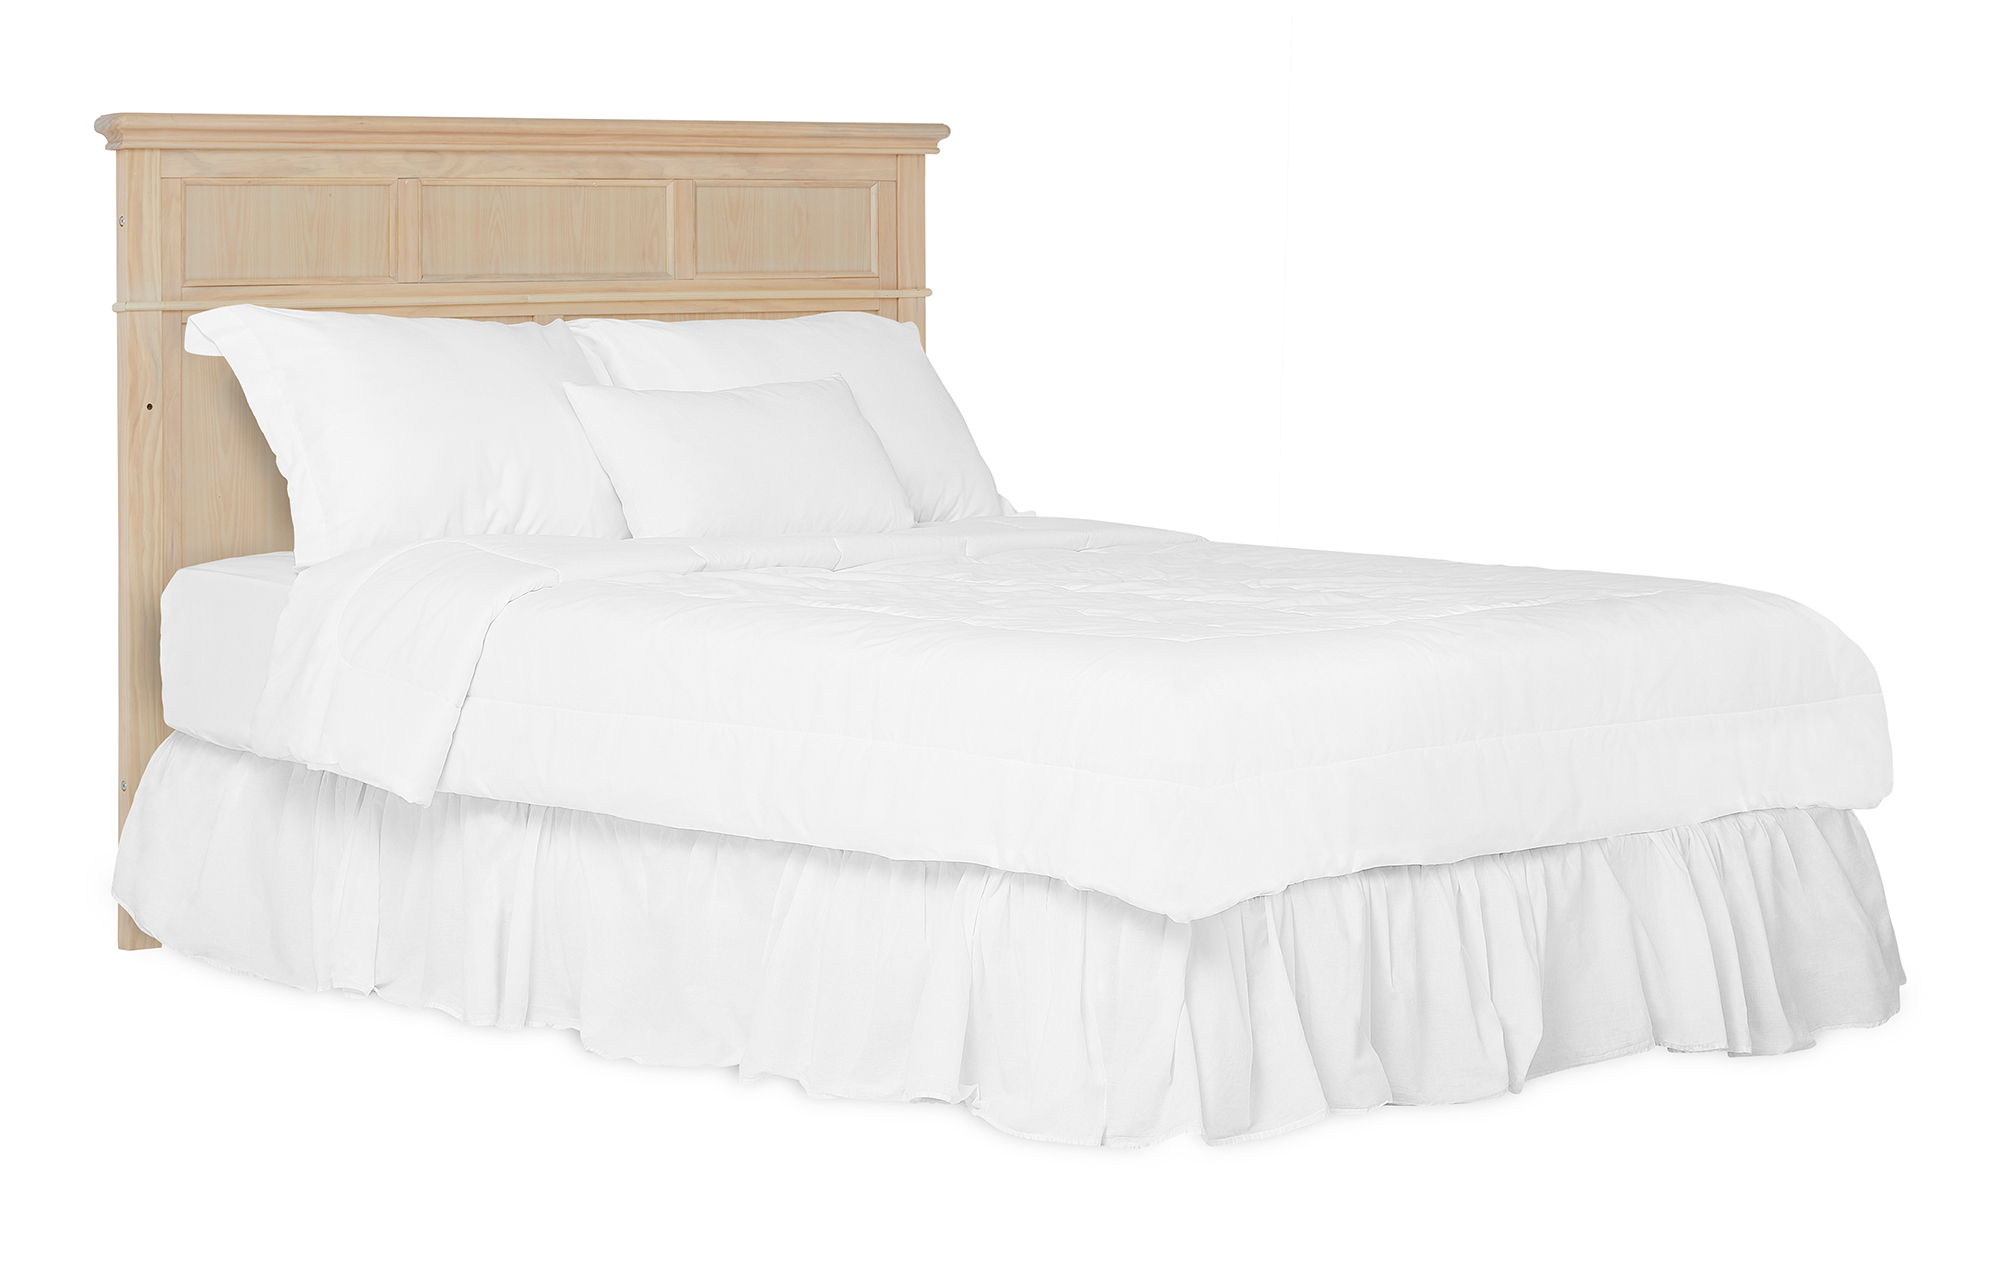 776-VOAK Dover Full Size Bed without Headboard